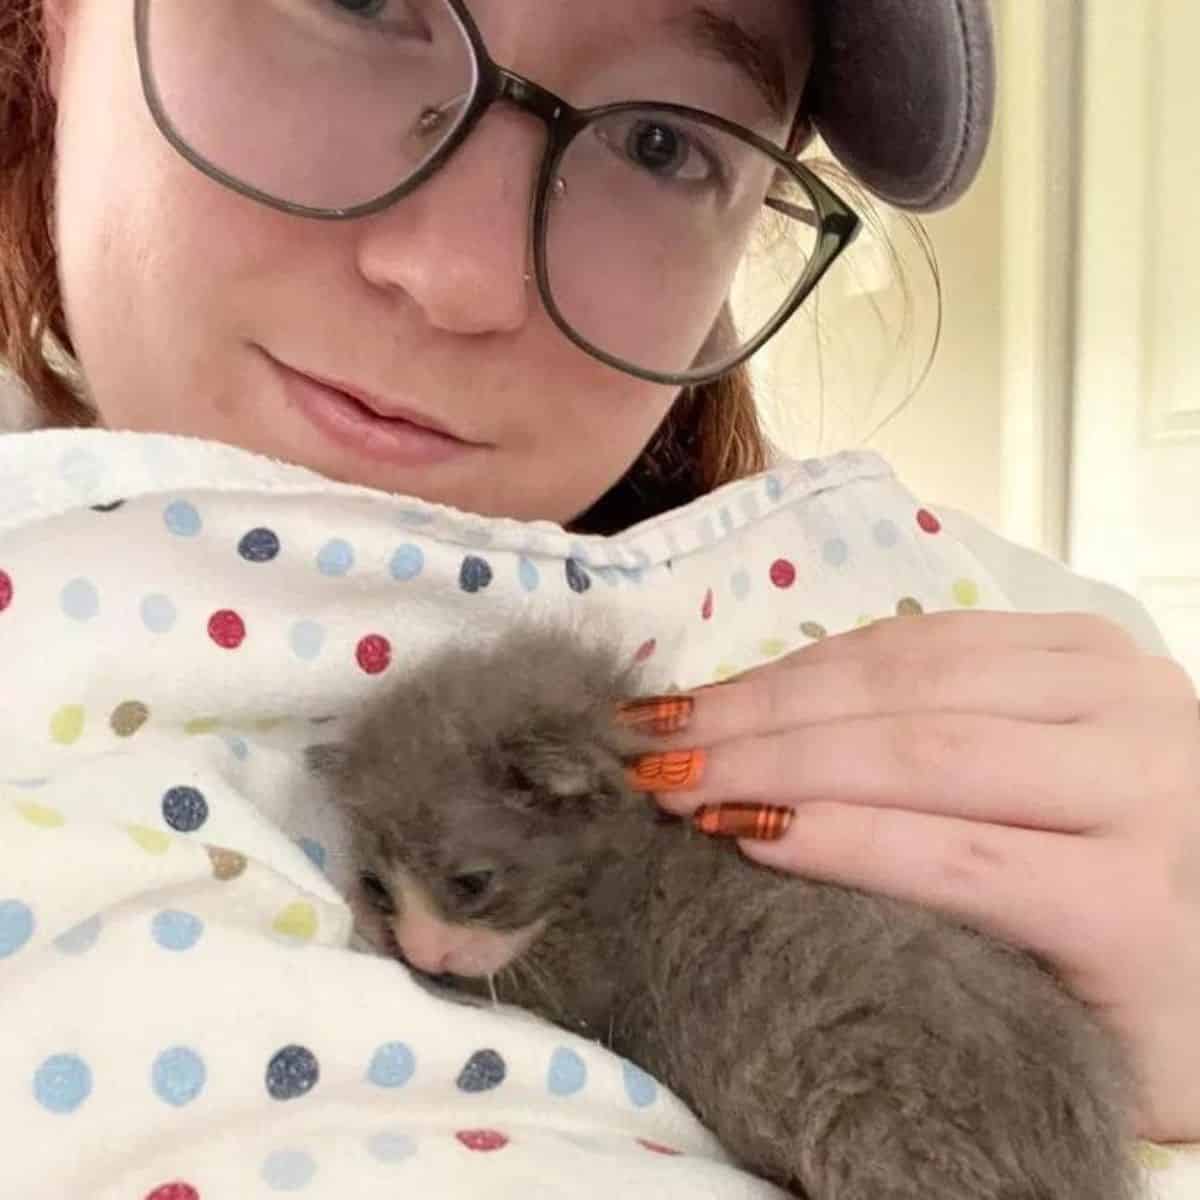 the kitten lies on a shaggy blanket on the woman's chest